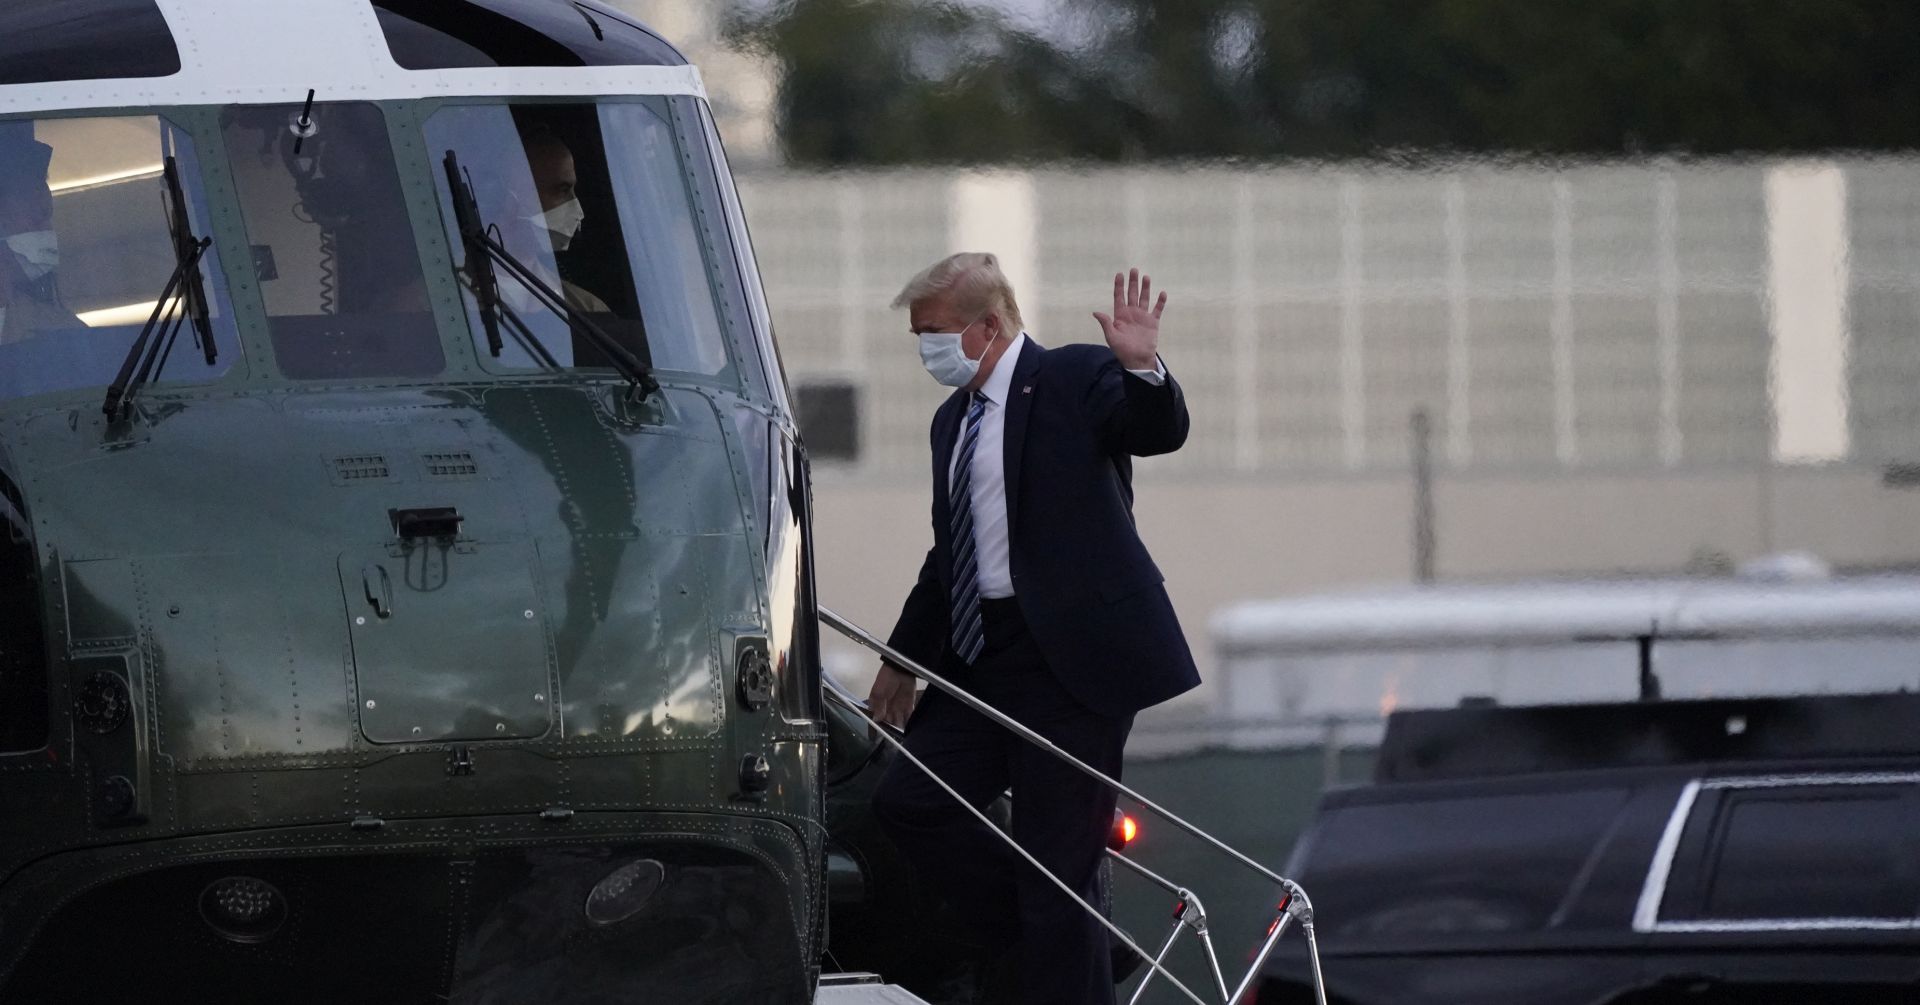 epa08723054 US President Donald J. Trump, wearing a mask, embarks onto Marine One after leaving Walter Reed National Military Medical Center, in Bethesda, Maryland, USA, 05 October 2020, to board Marine One for a return trip to the White House after receiving treatment for a COVID-19 infection.  EPA/Chris Kleponis / POOL